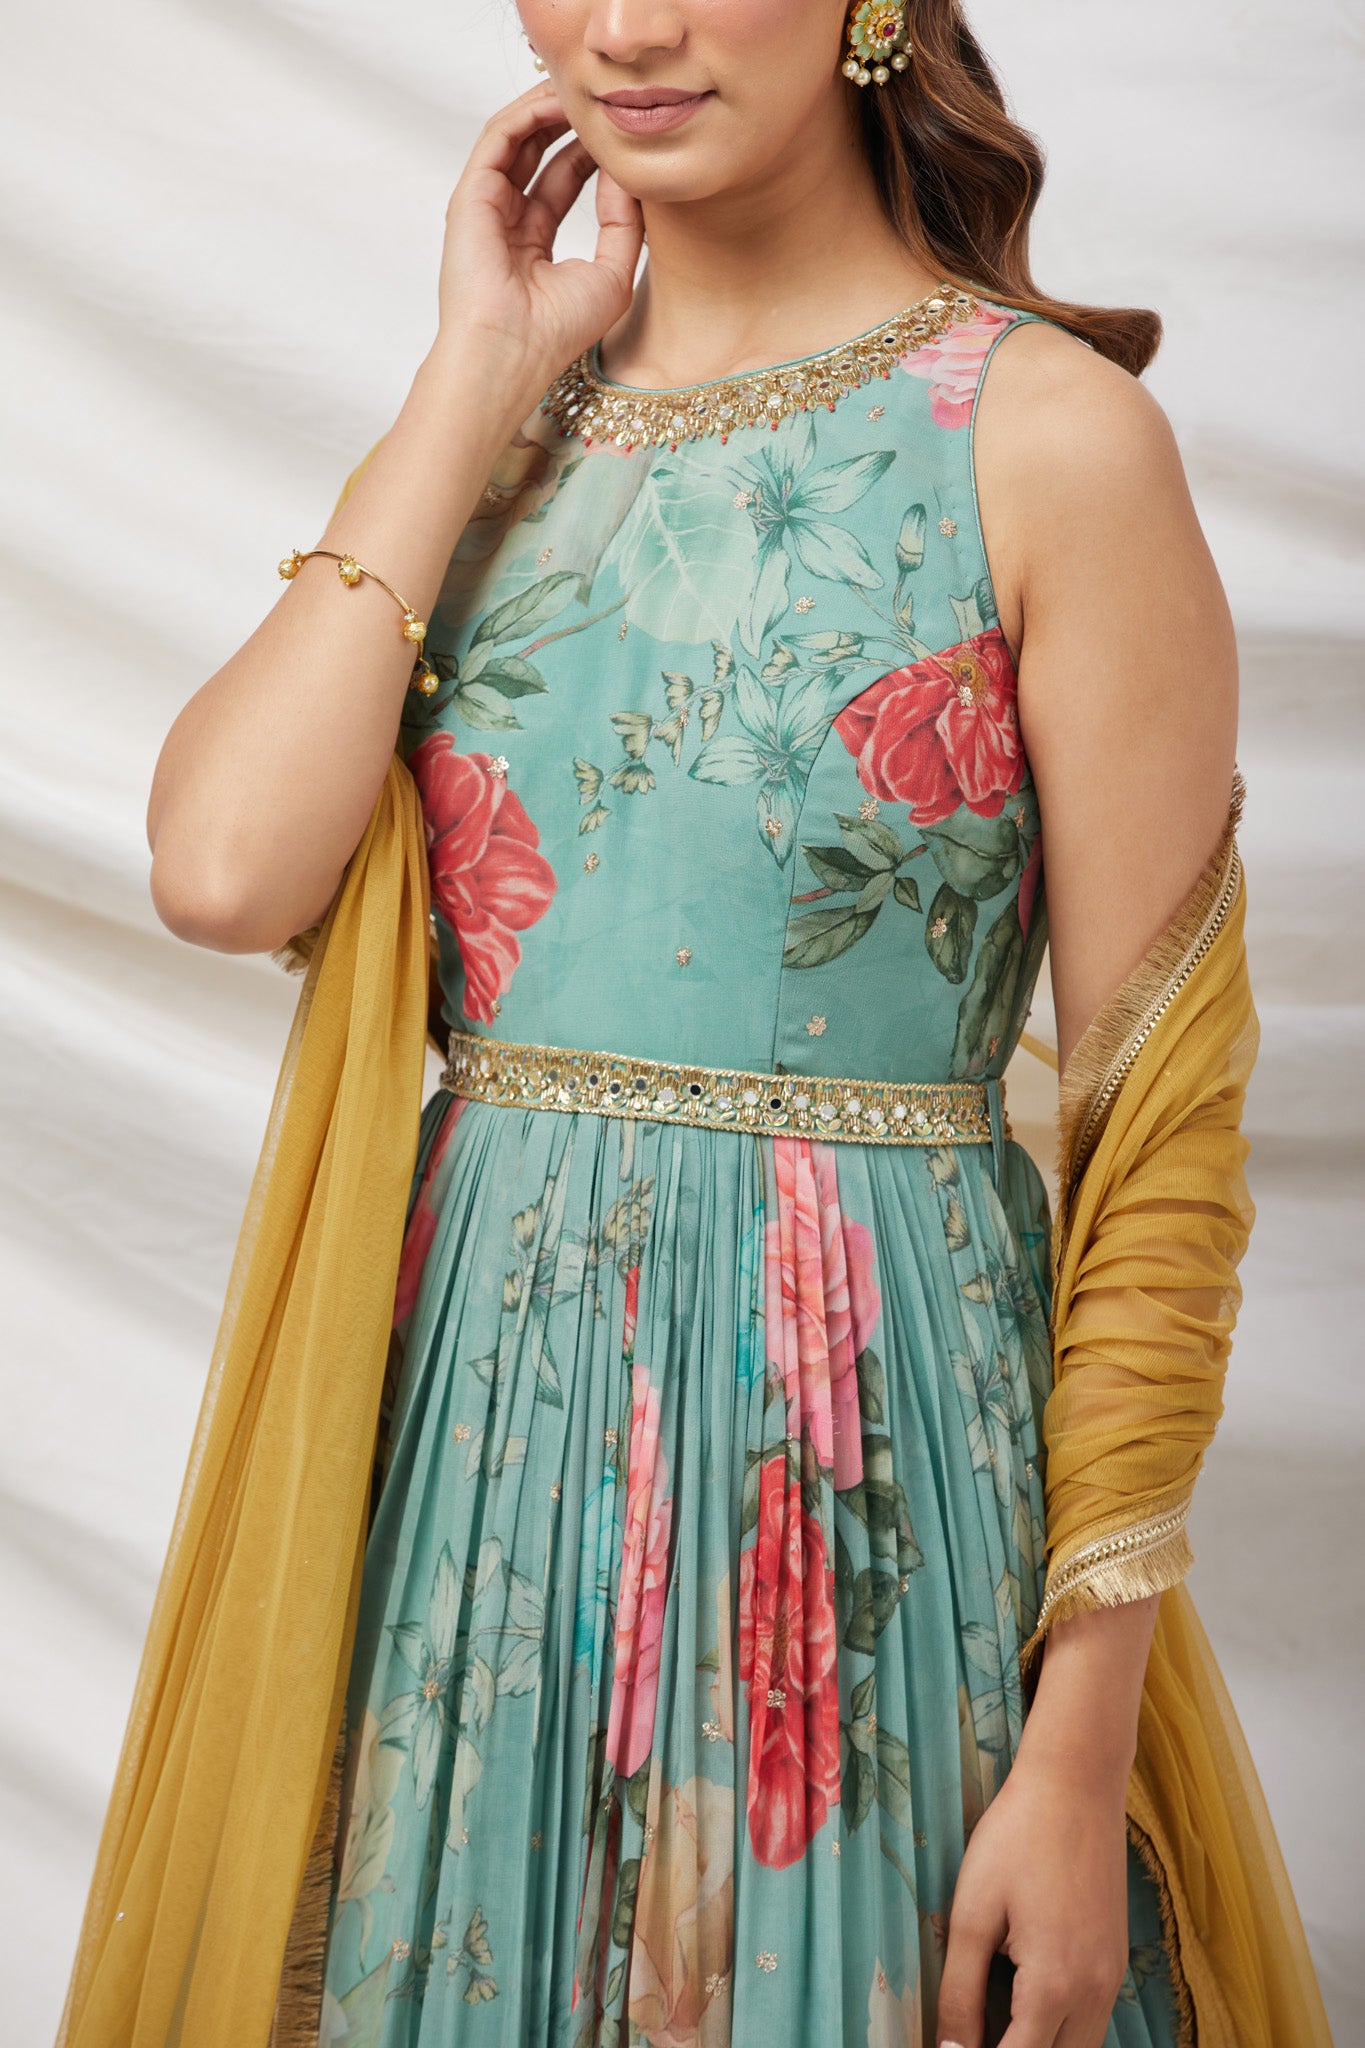 Buy Blue floral printed anarkali suit set featuring mirror, zari & sequin embroidery on neck and belt that adds definition and glamour. Dazzle on weddings and special occasions with exquisite Indian designer dresses, sharara suits, Anarkali suits, and wedding lehengas from Pure Elegance Indian fashion store in the USA.